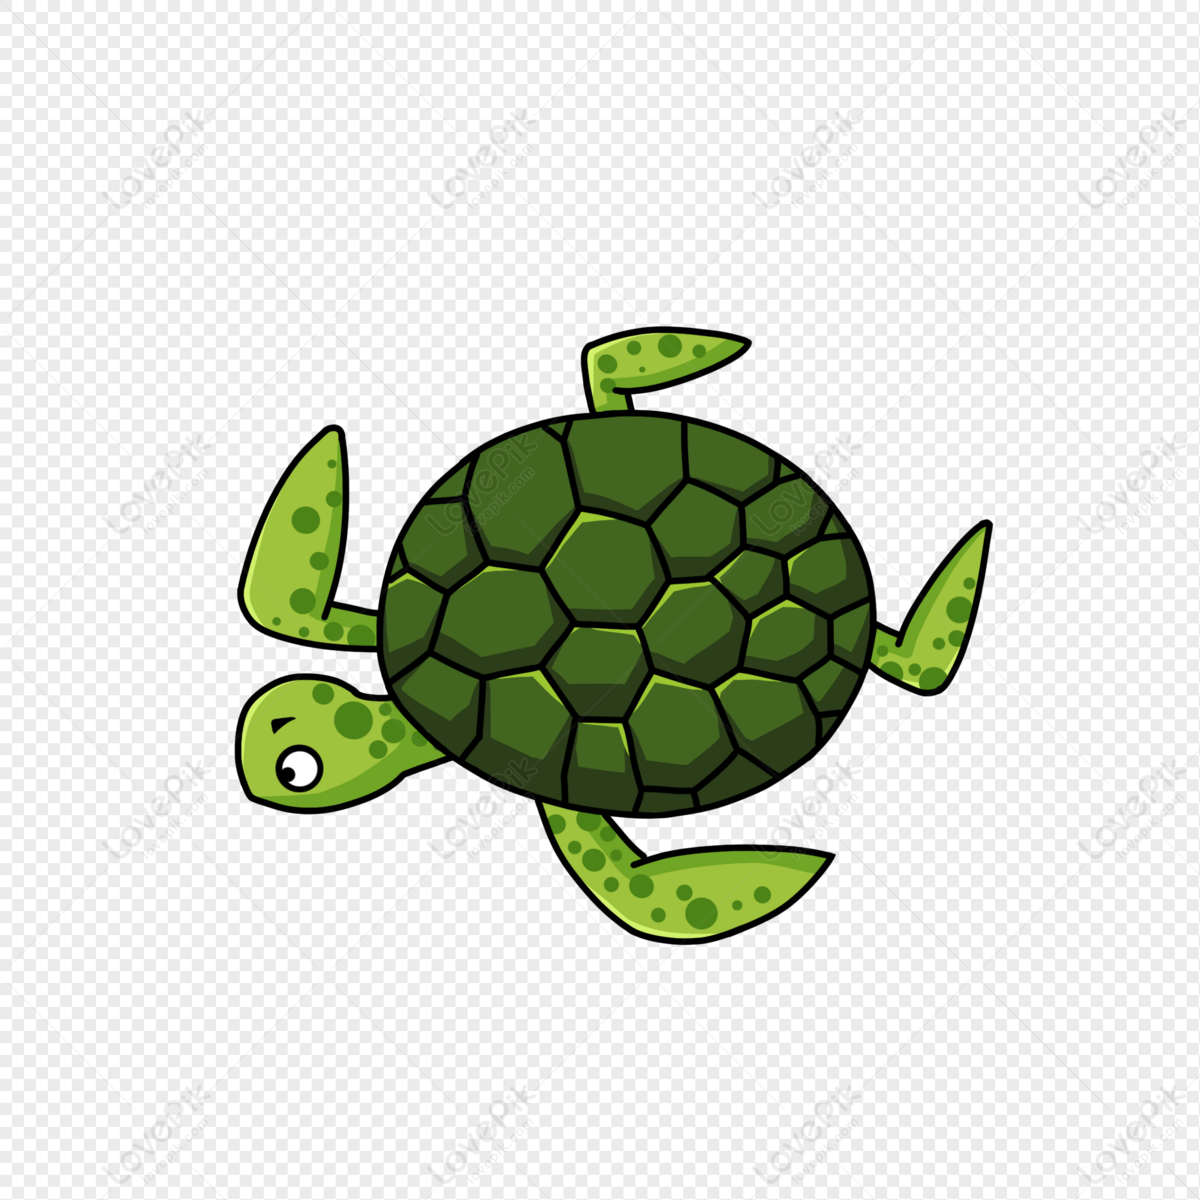 Cartoon Sea Turtle PNG Image Free Download And Clipart Image For Free  Download - Lovepik | 401389841